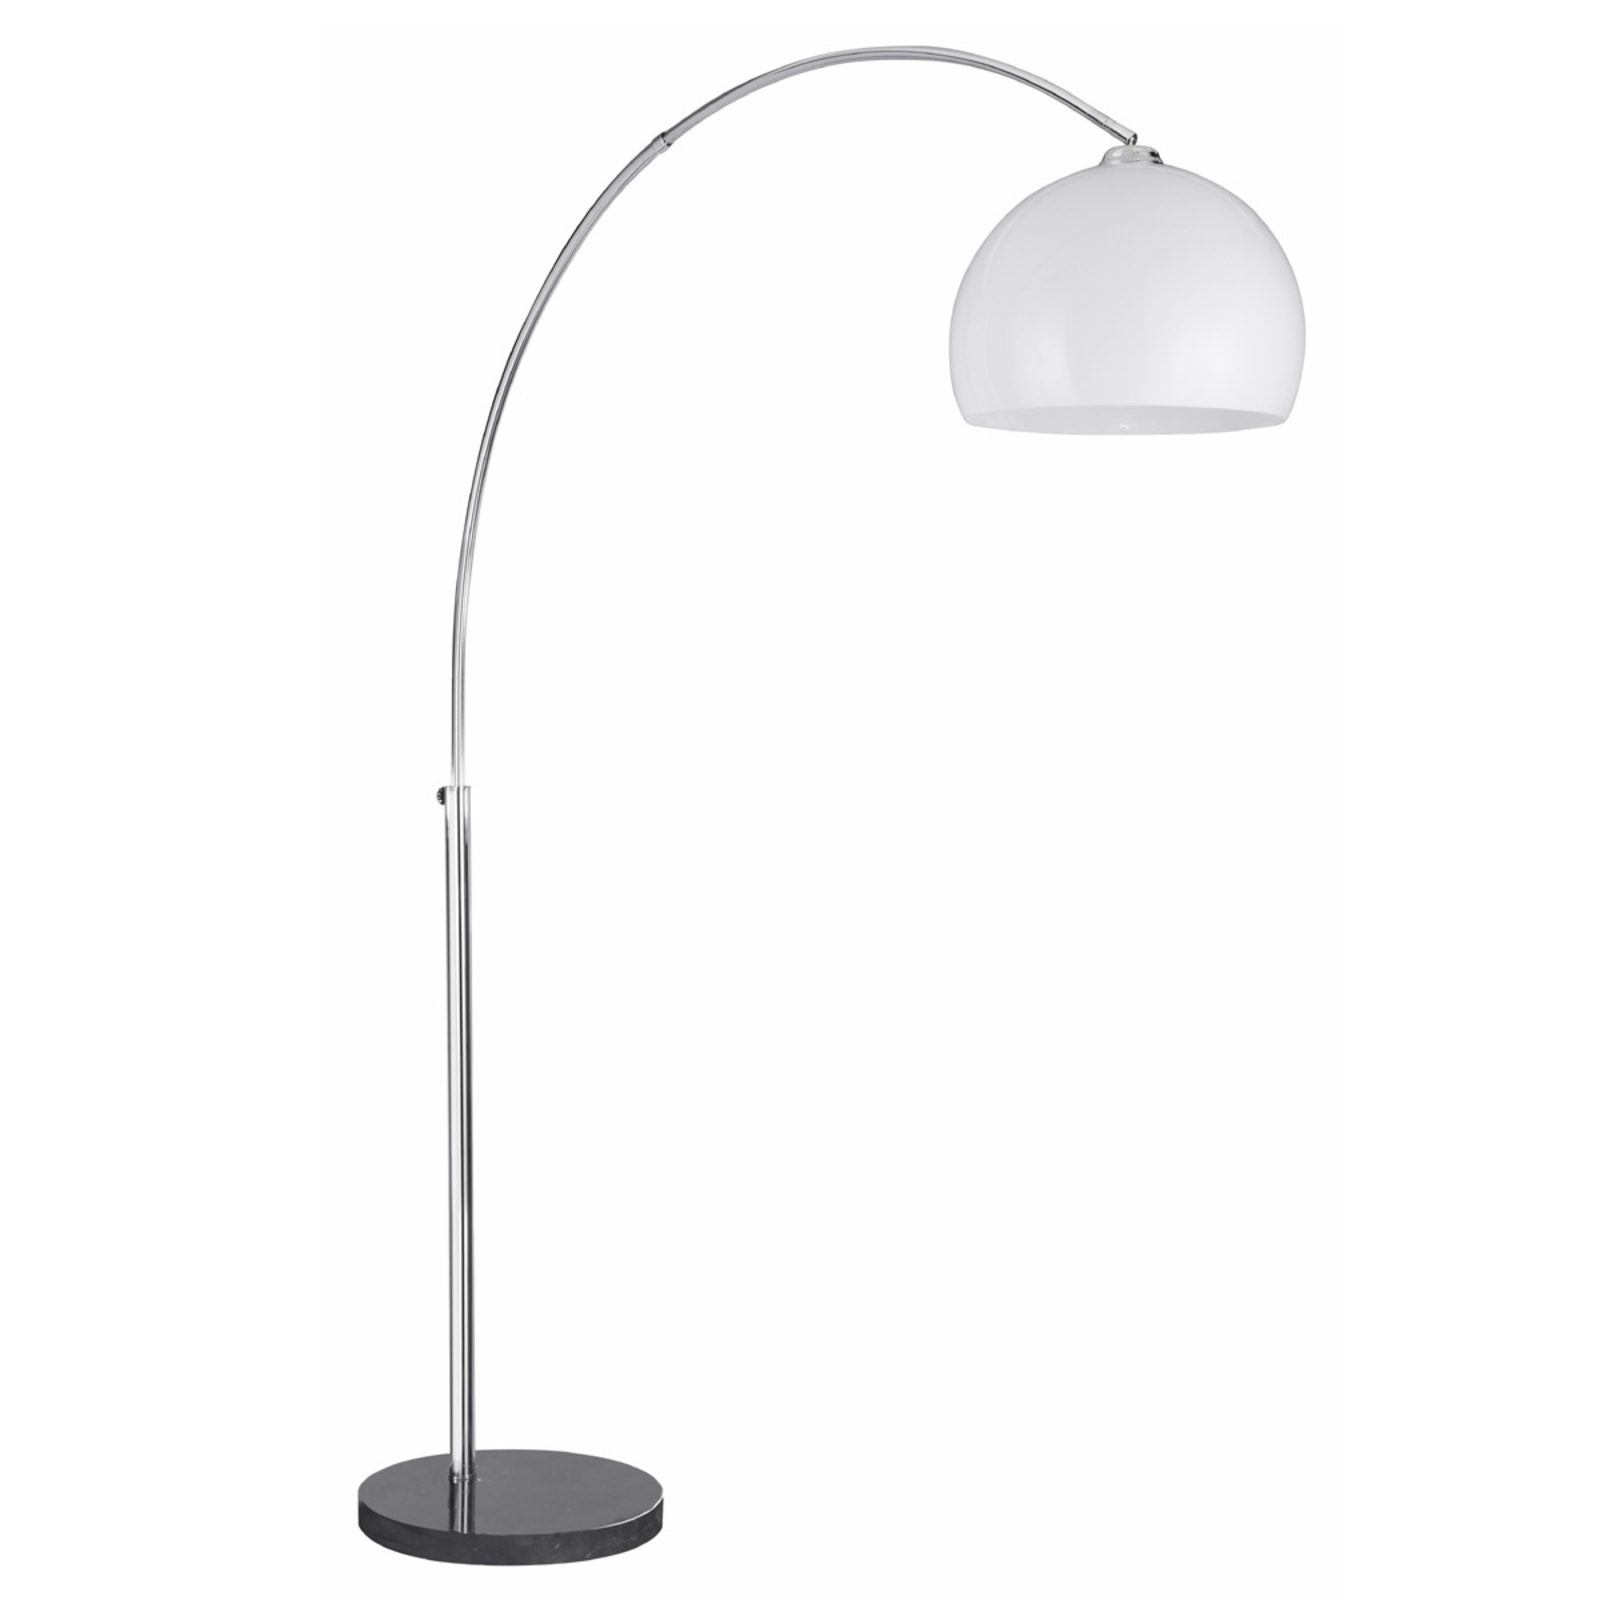 Arcos arc lamp with marble base